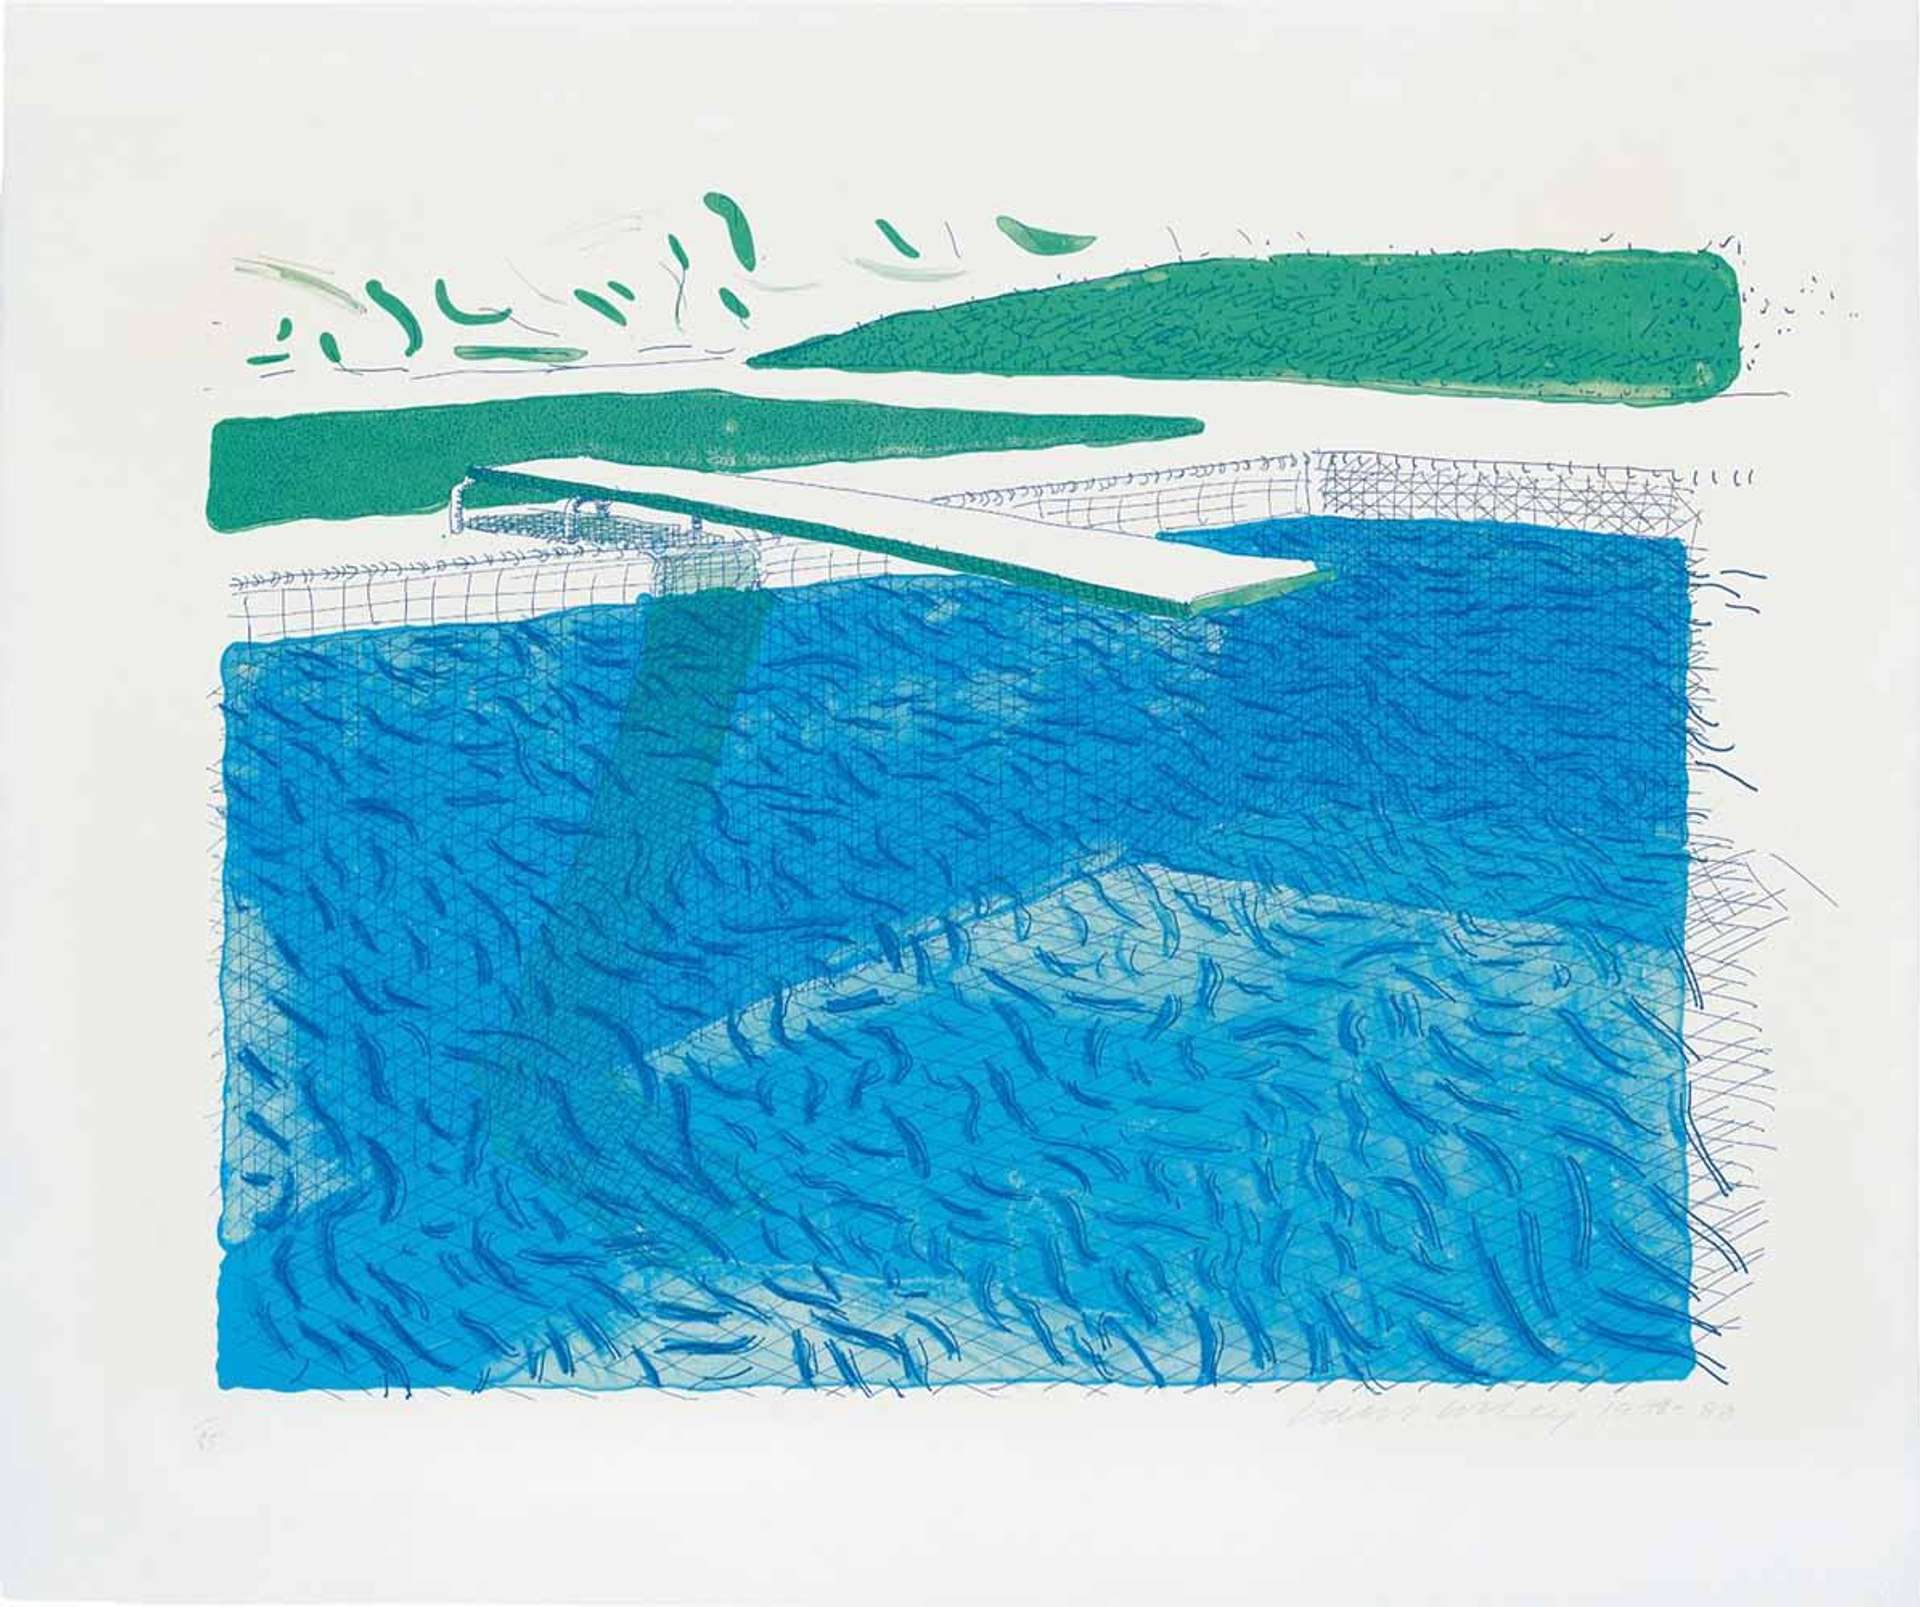 Lithographic Water Made Of Lines, Crayon, And Two Blue Washes by David Hockney